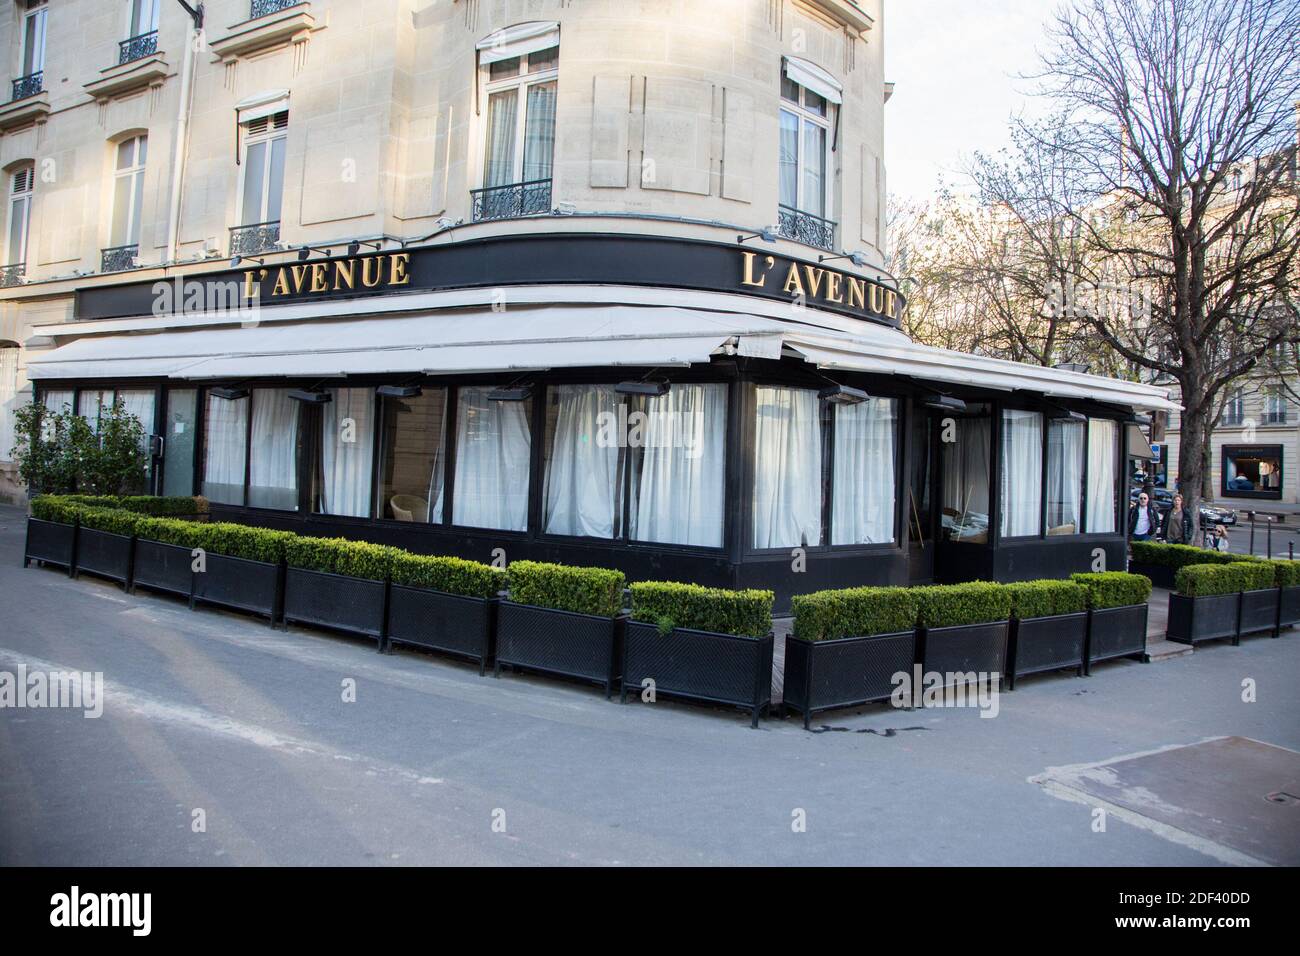 Coronavirus - Covid 19 - L'Avenue Restaurant closed after gourvernement measure on March 15, 2020 in Paris, France. Photo by Nasser Berzane/ABACAPRESS.COM Stock Photo